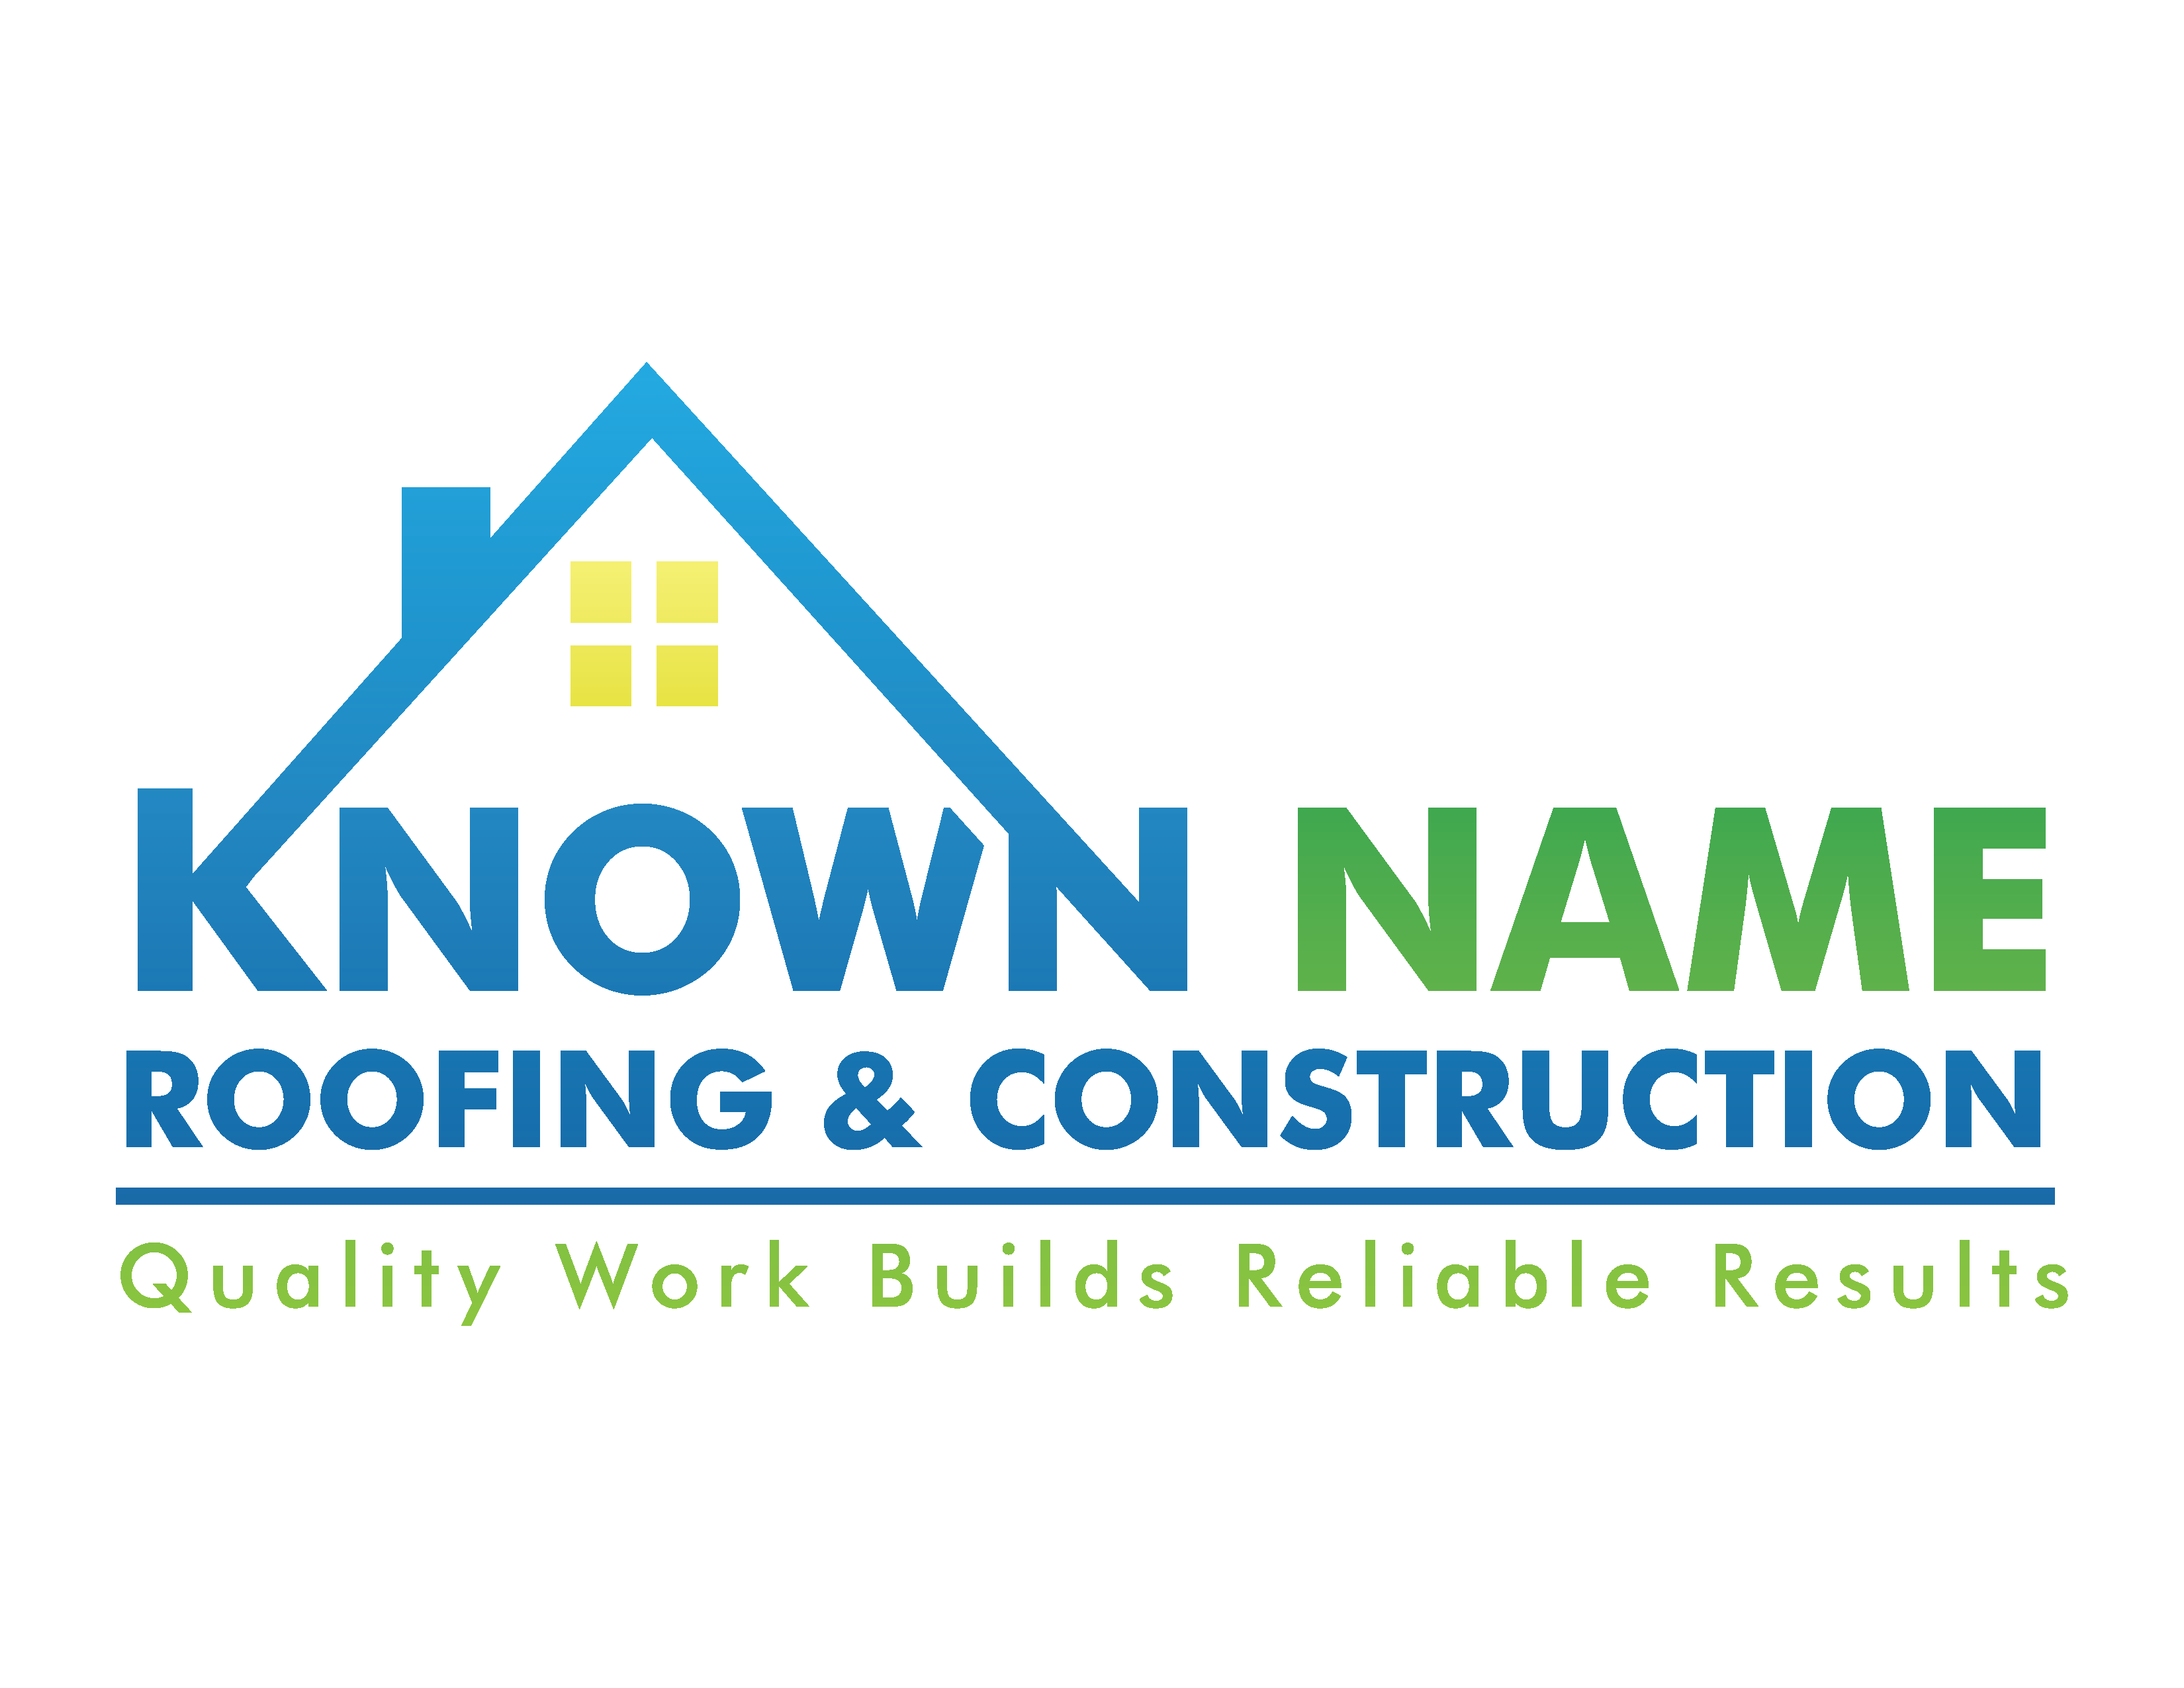 Known Name Roofing